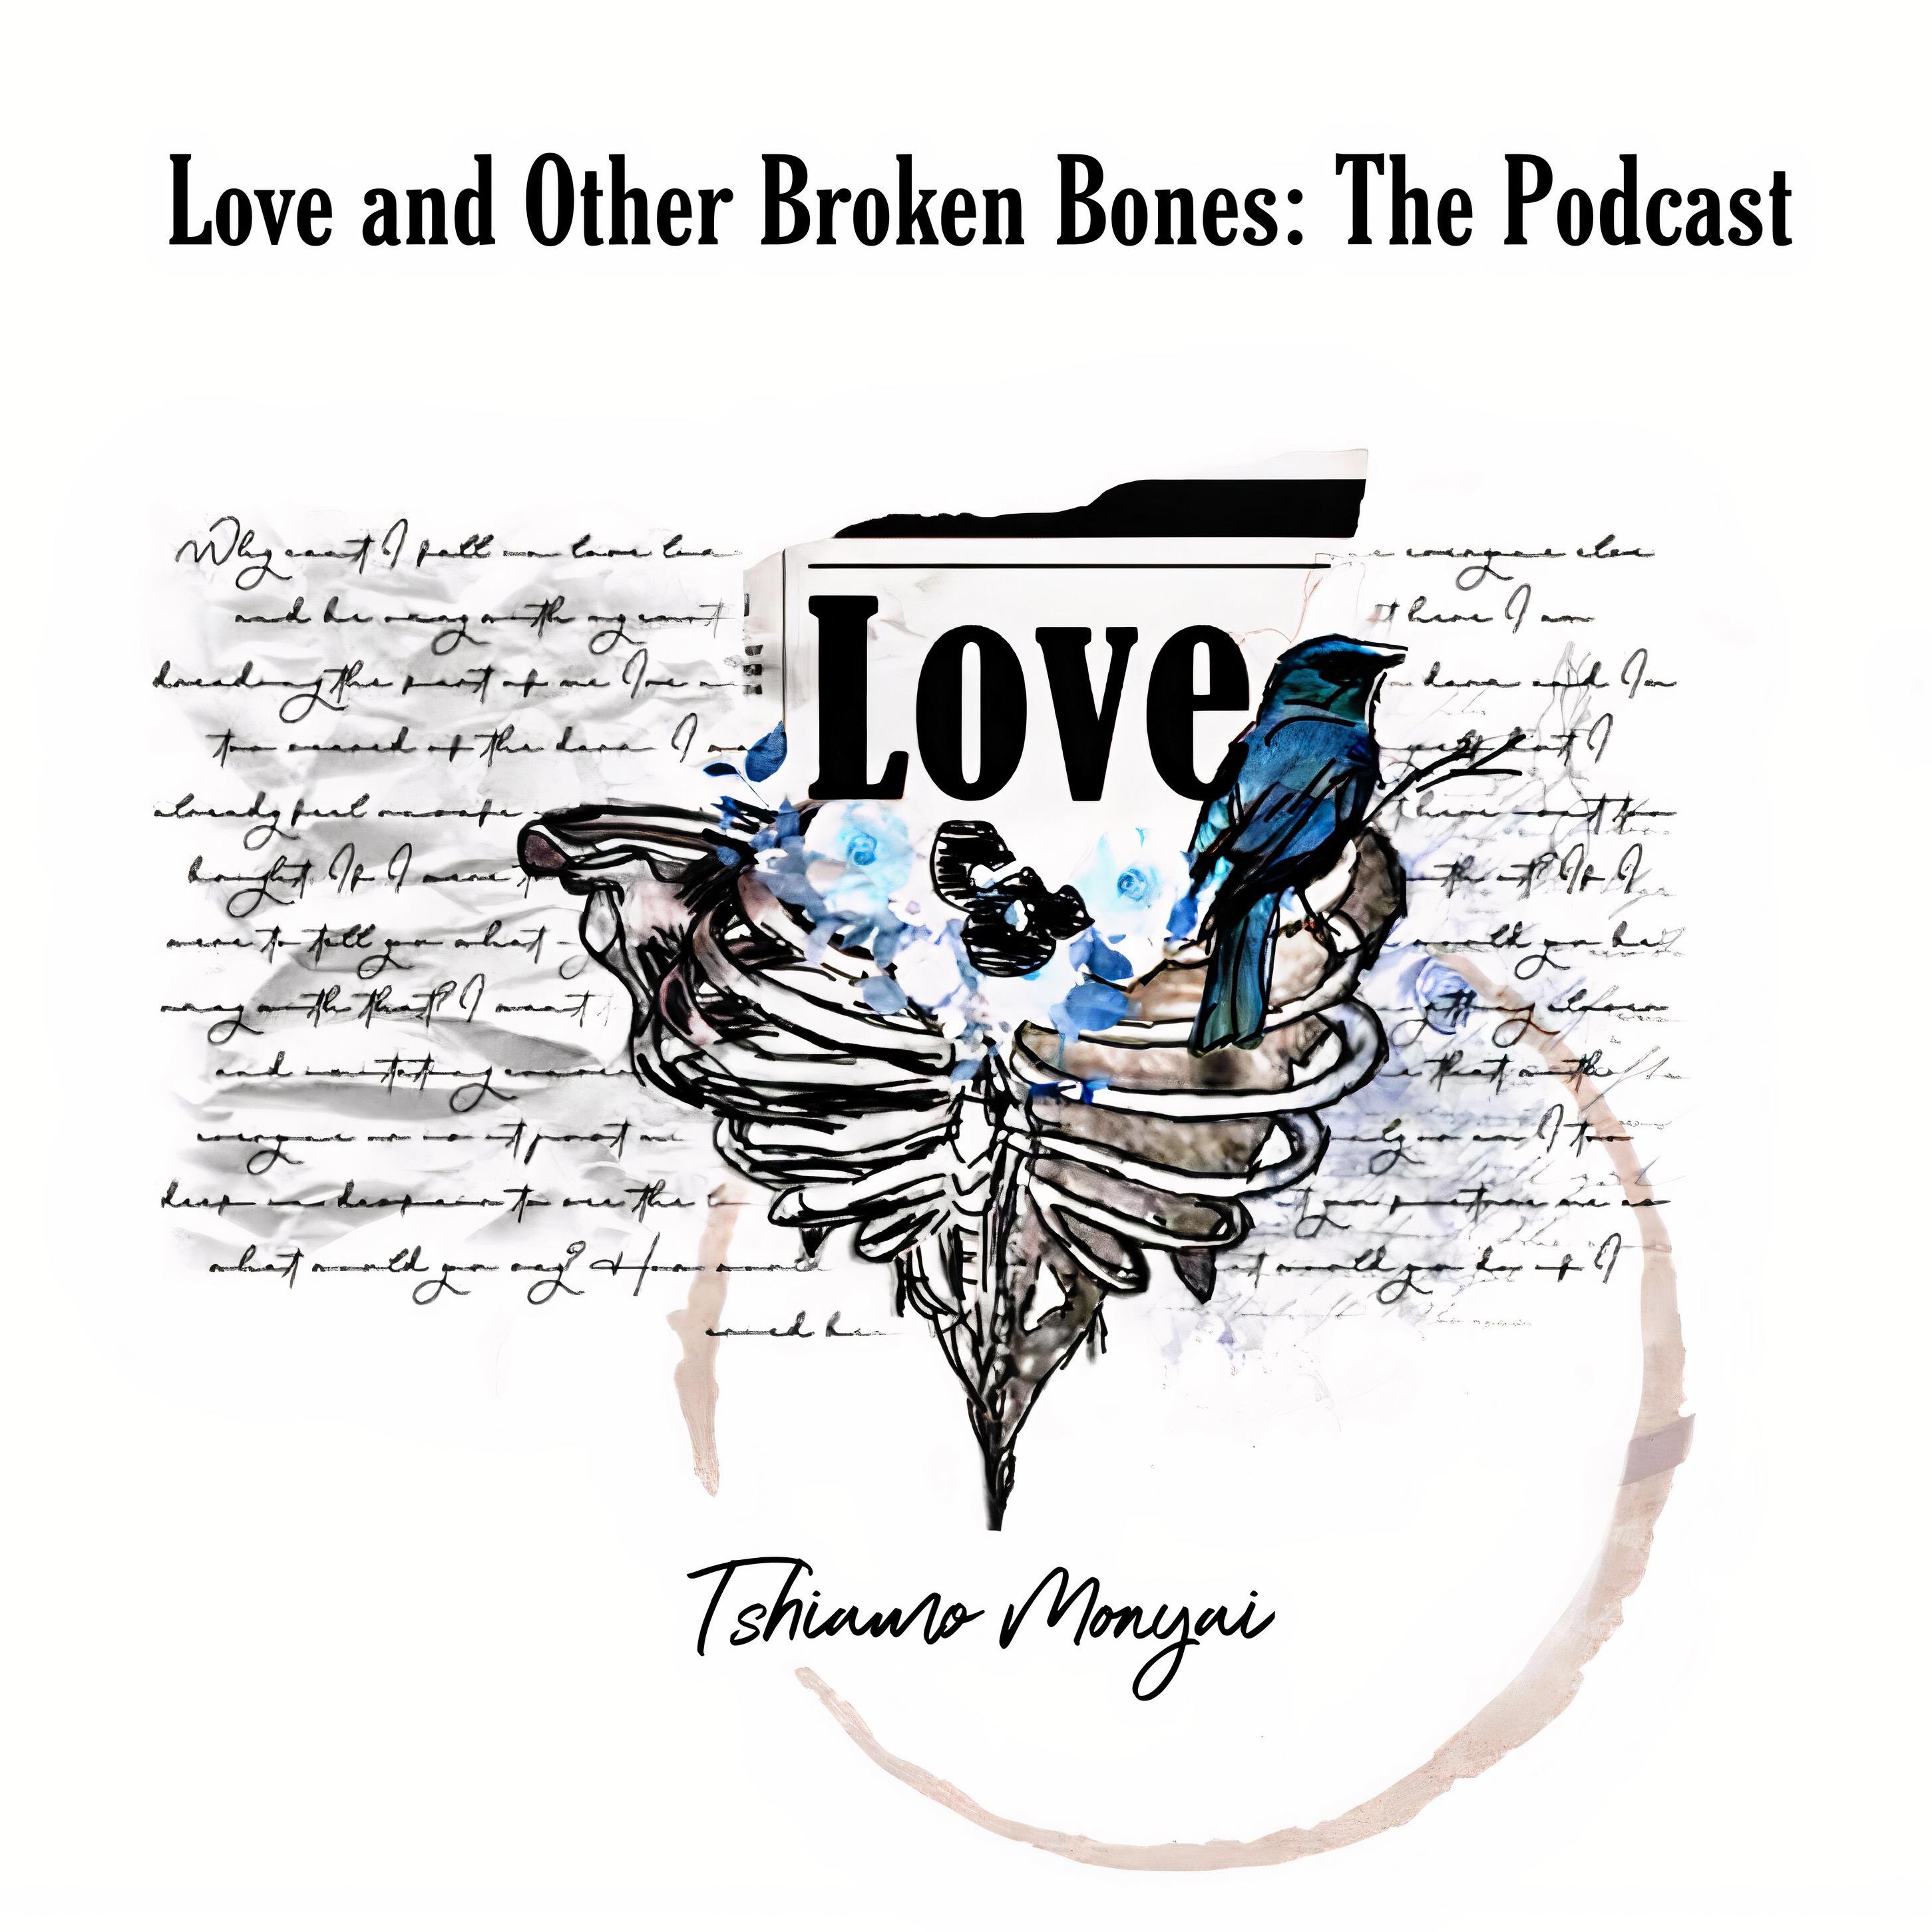 Love and Other Broken Bones: The Podcast